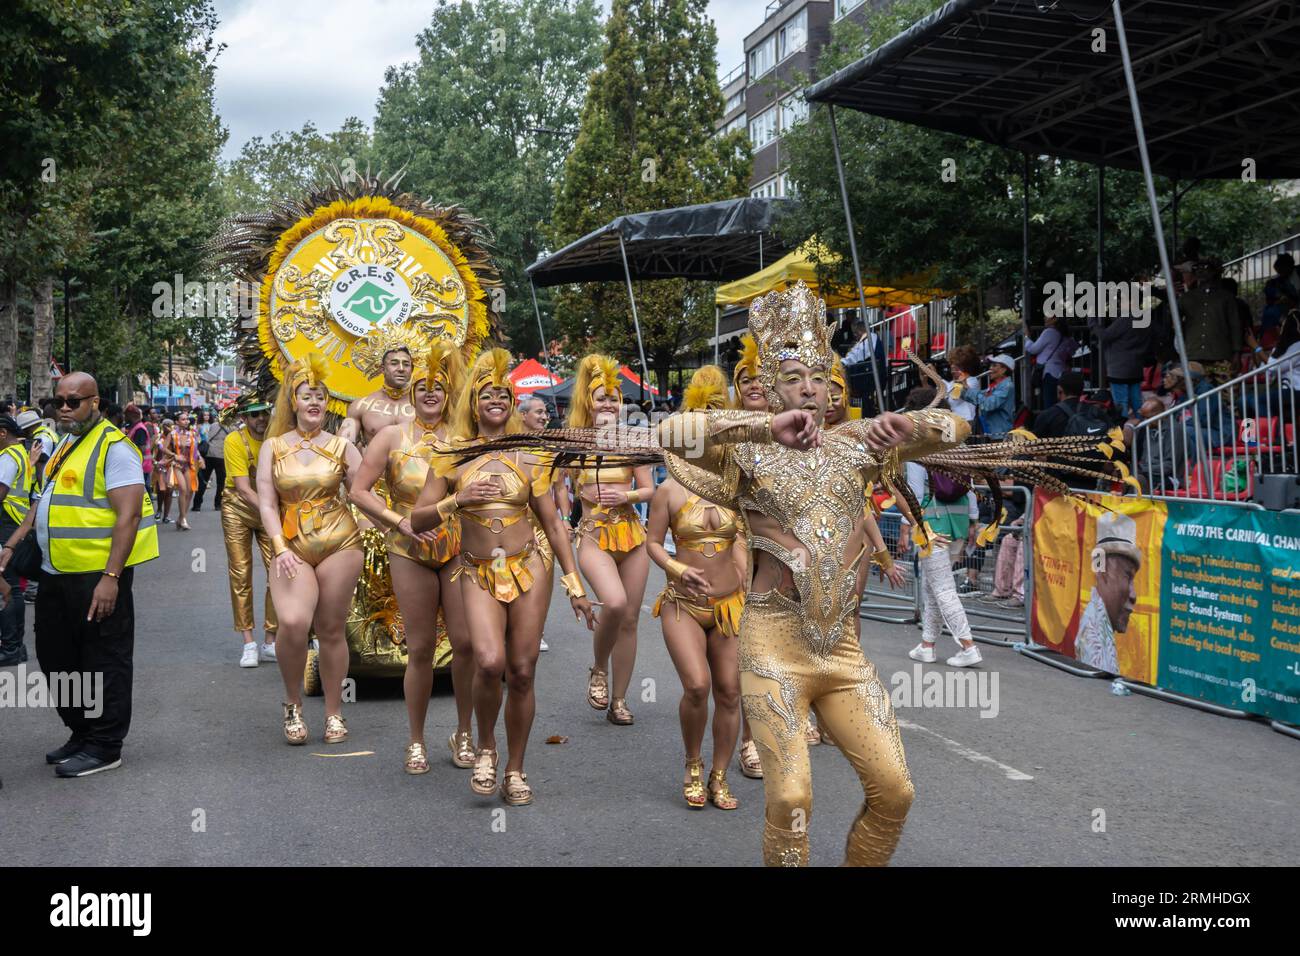 Notting Hill, London, England. 28th August 2023. Carnival Participants wearing traditional Samba outfits at Notting Hill Carnival 2023. Credit: Jessica Girvan/Alamy Live News Stock Photo